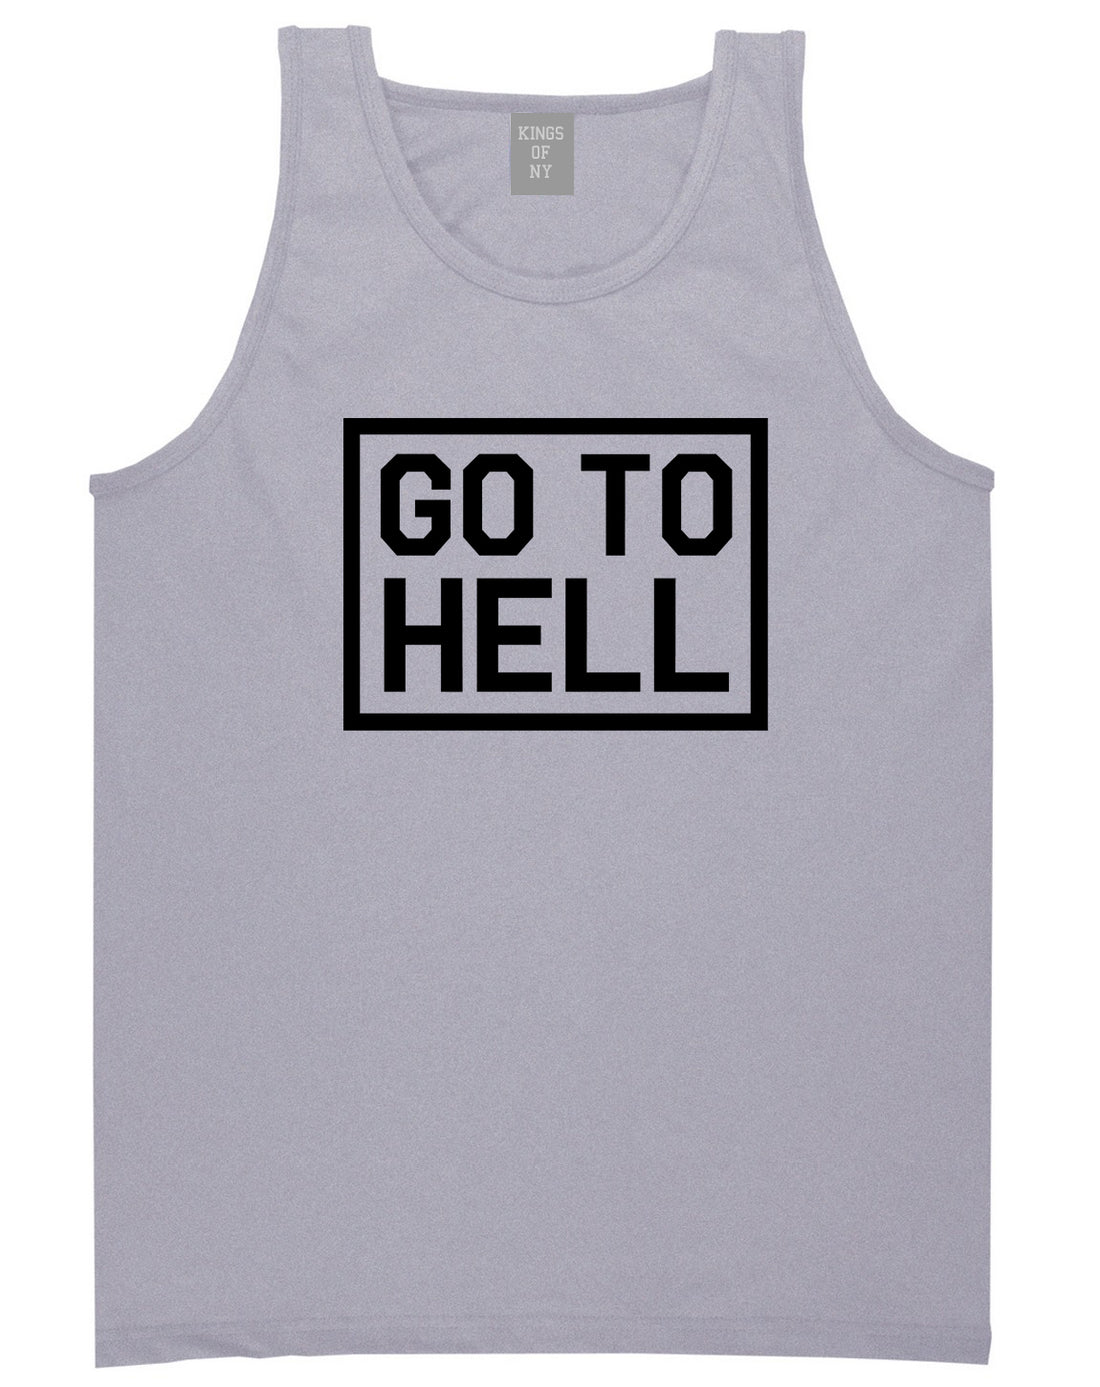 Go To Hell Mens Grey Tank Top Shirt by KINGS OF NY